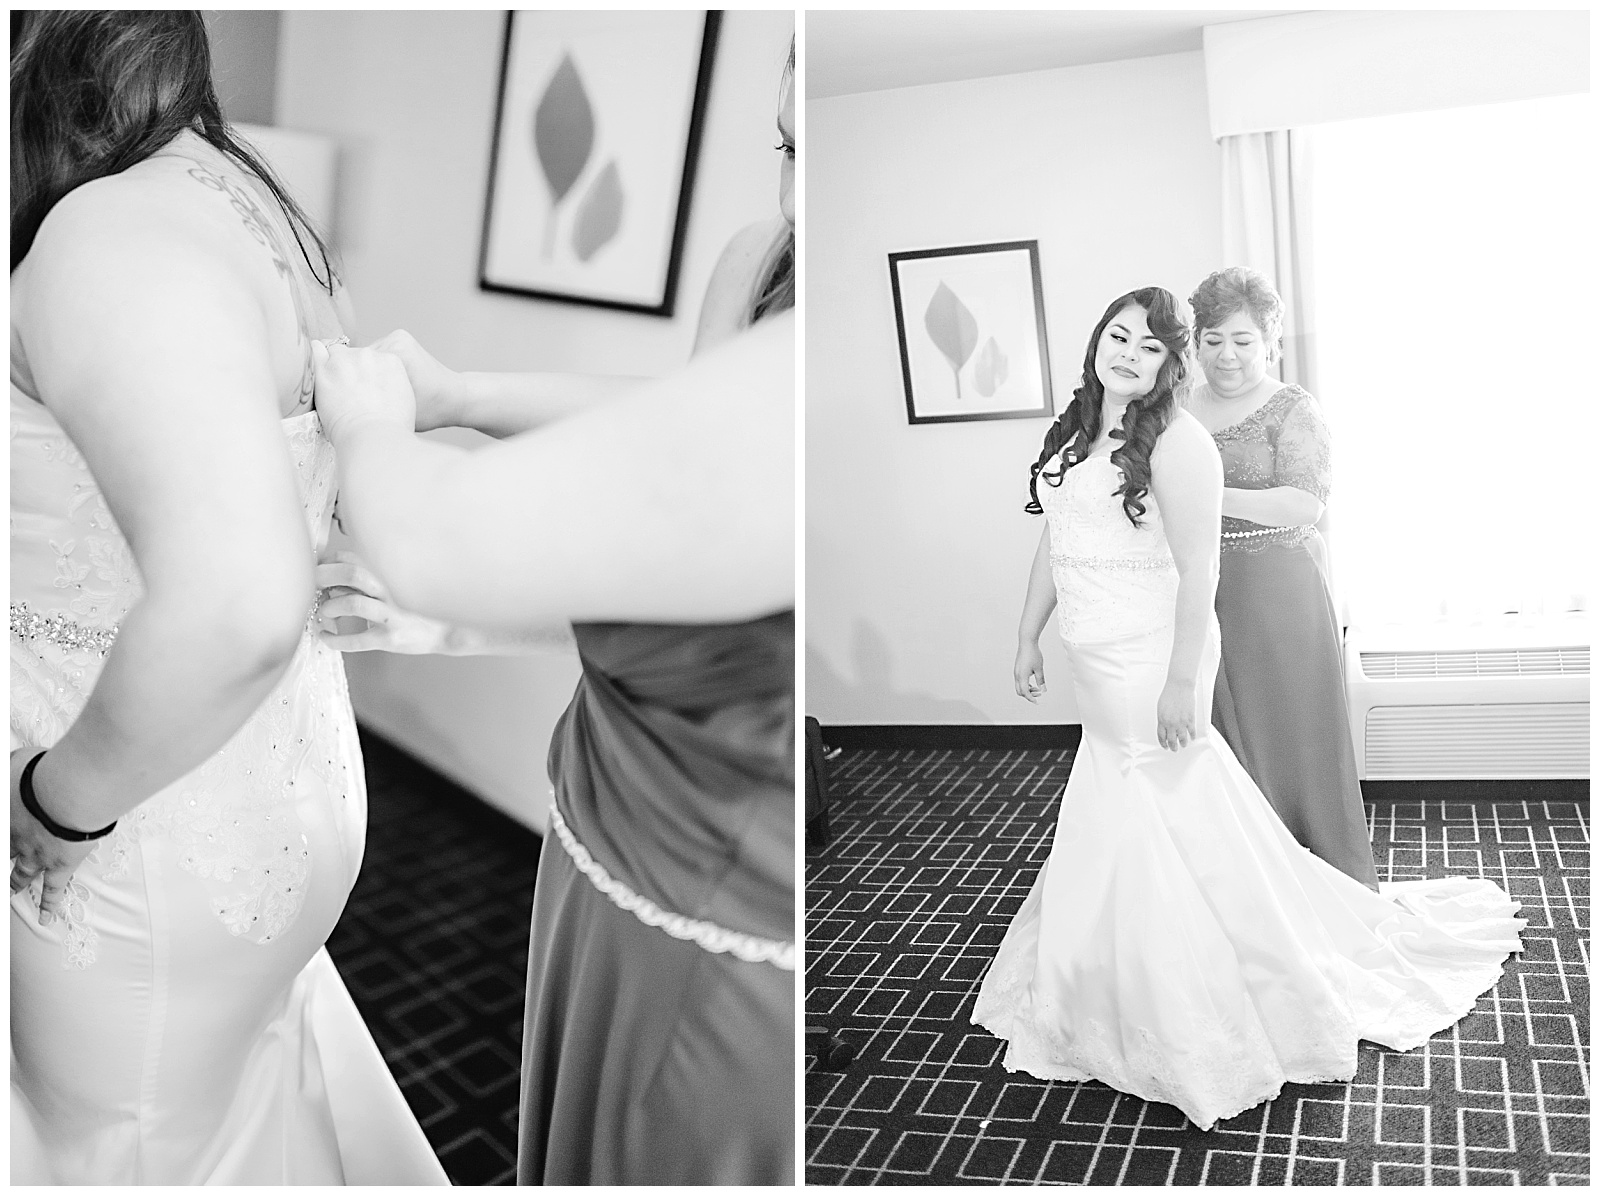 Pasadena Wedding Photography.  Photography by Mollie Jane Photography.  To see more, go to www.molliejanephotography.com